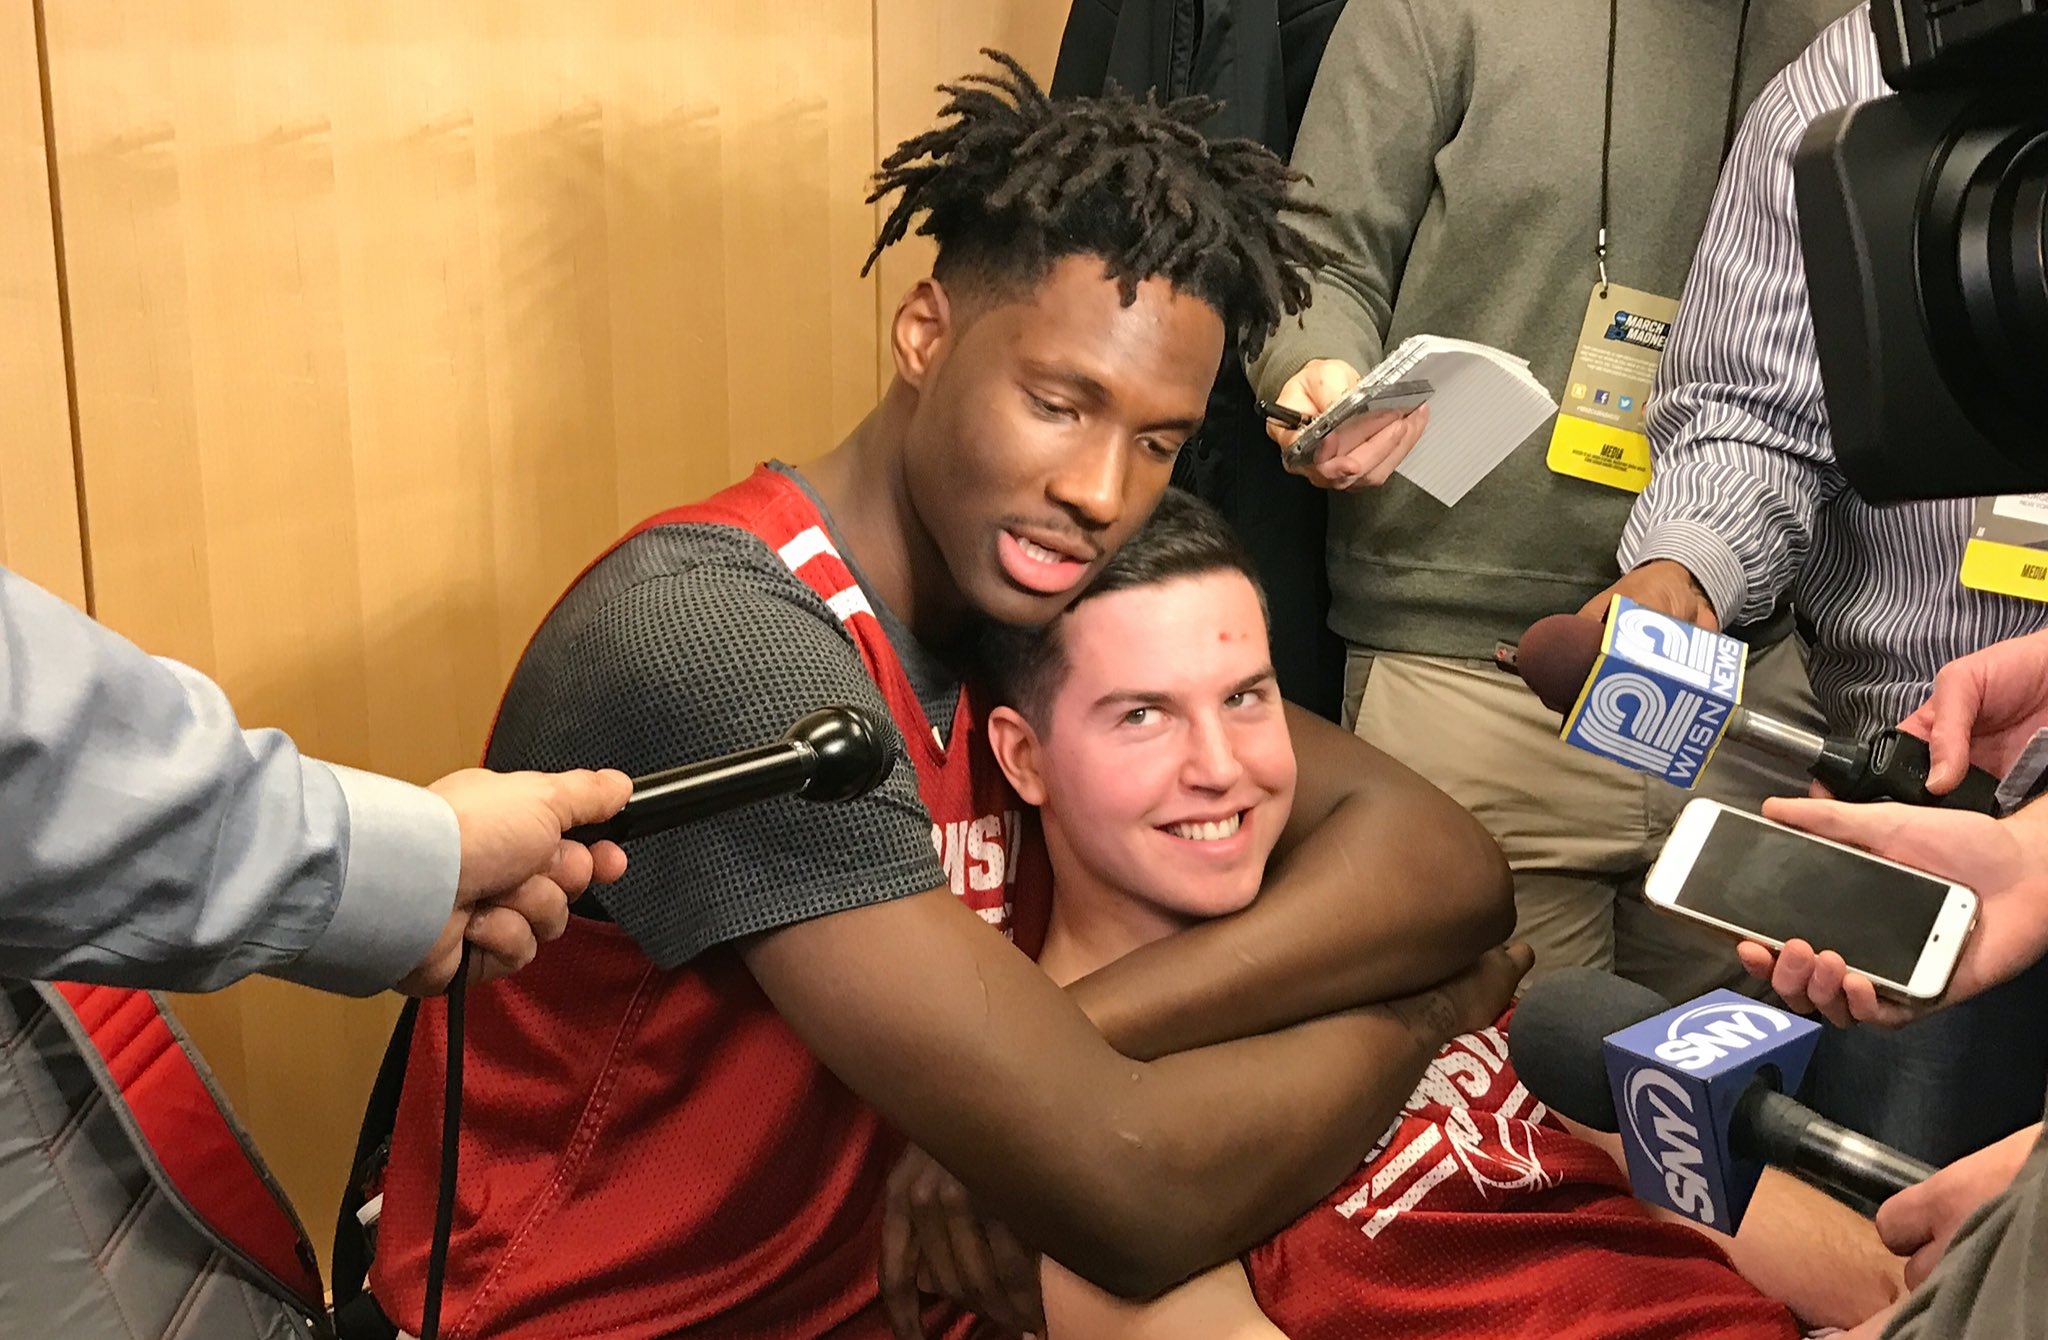 Nigel Hayes’ loudest statement: Getting Badgers to Sweet 16